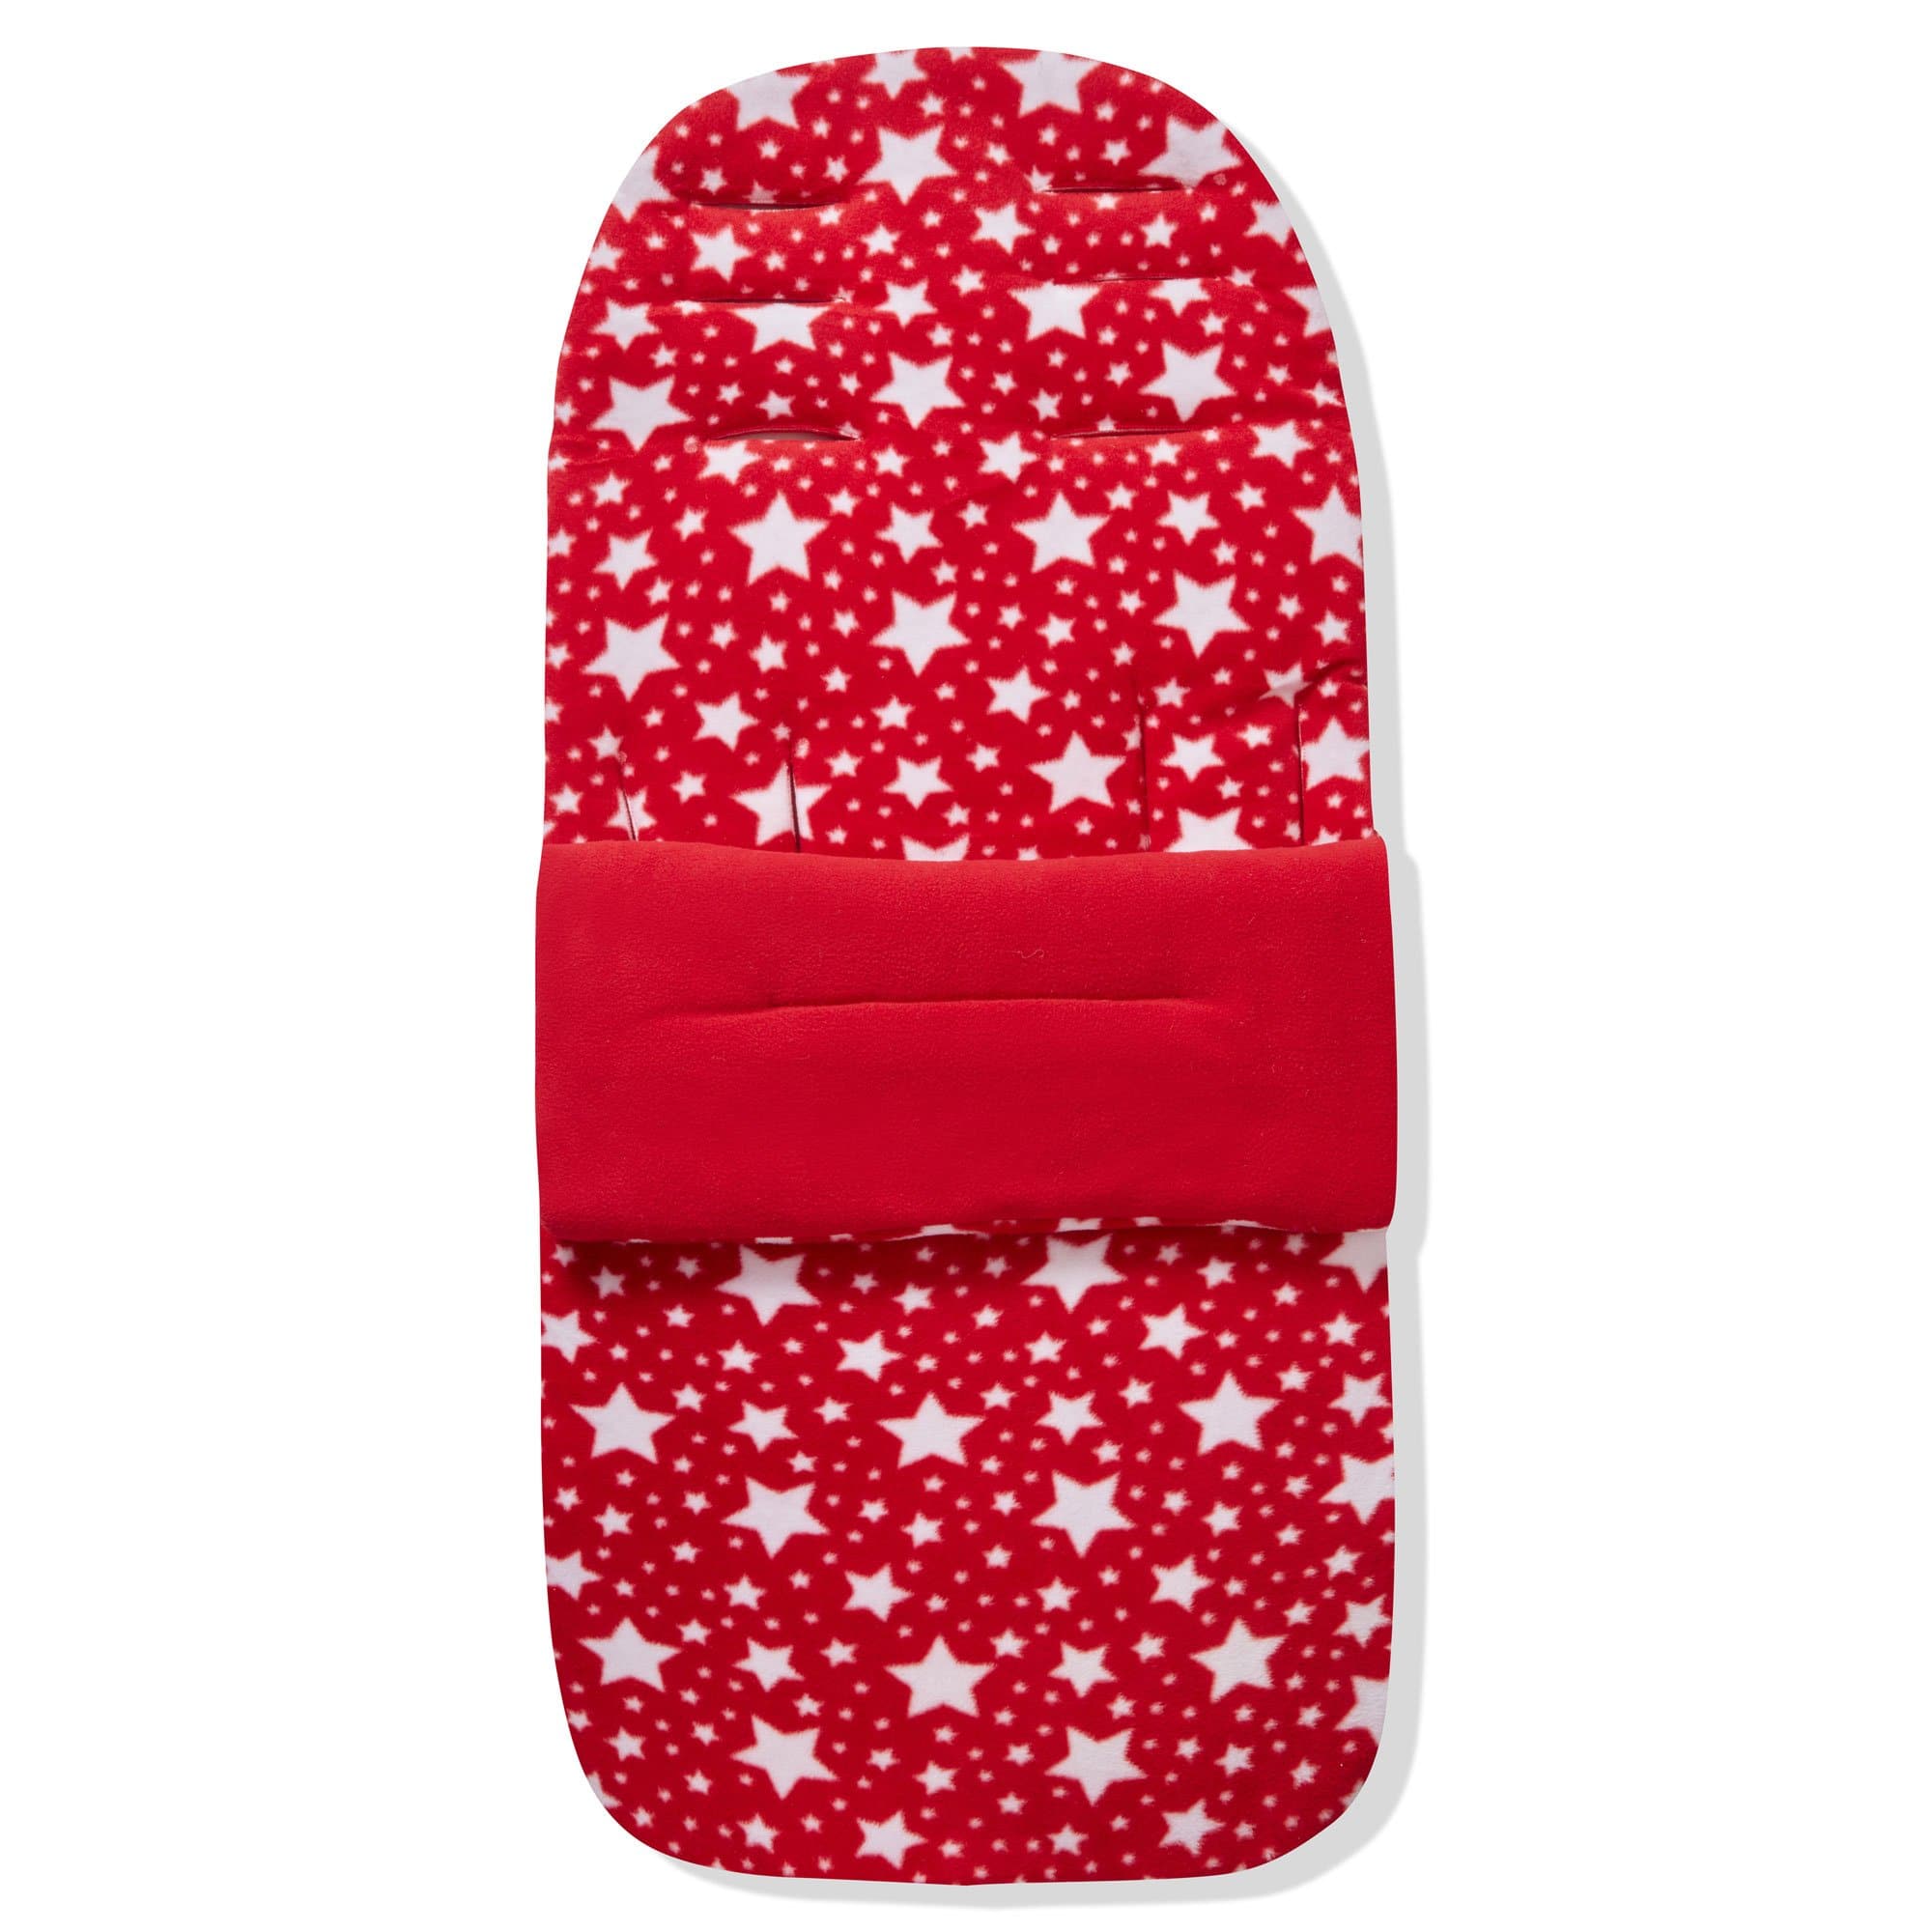 Fleece Footmuff / Cosy Toes Compatible with Babylo - For Your Little One